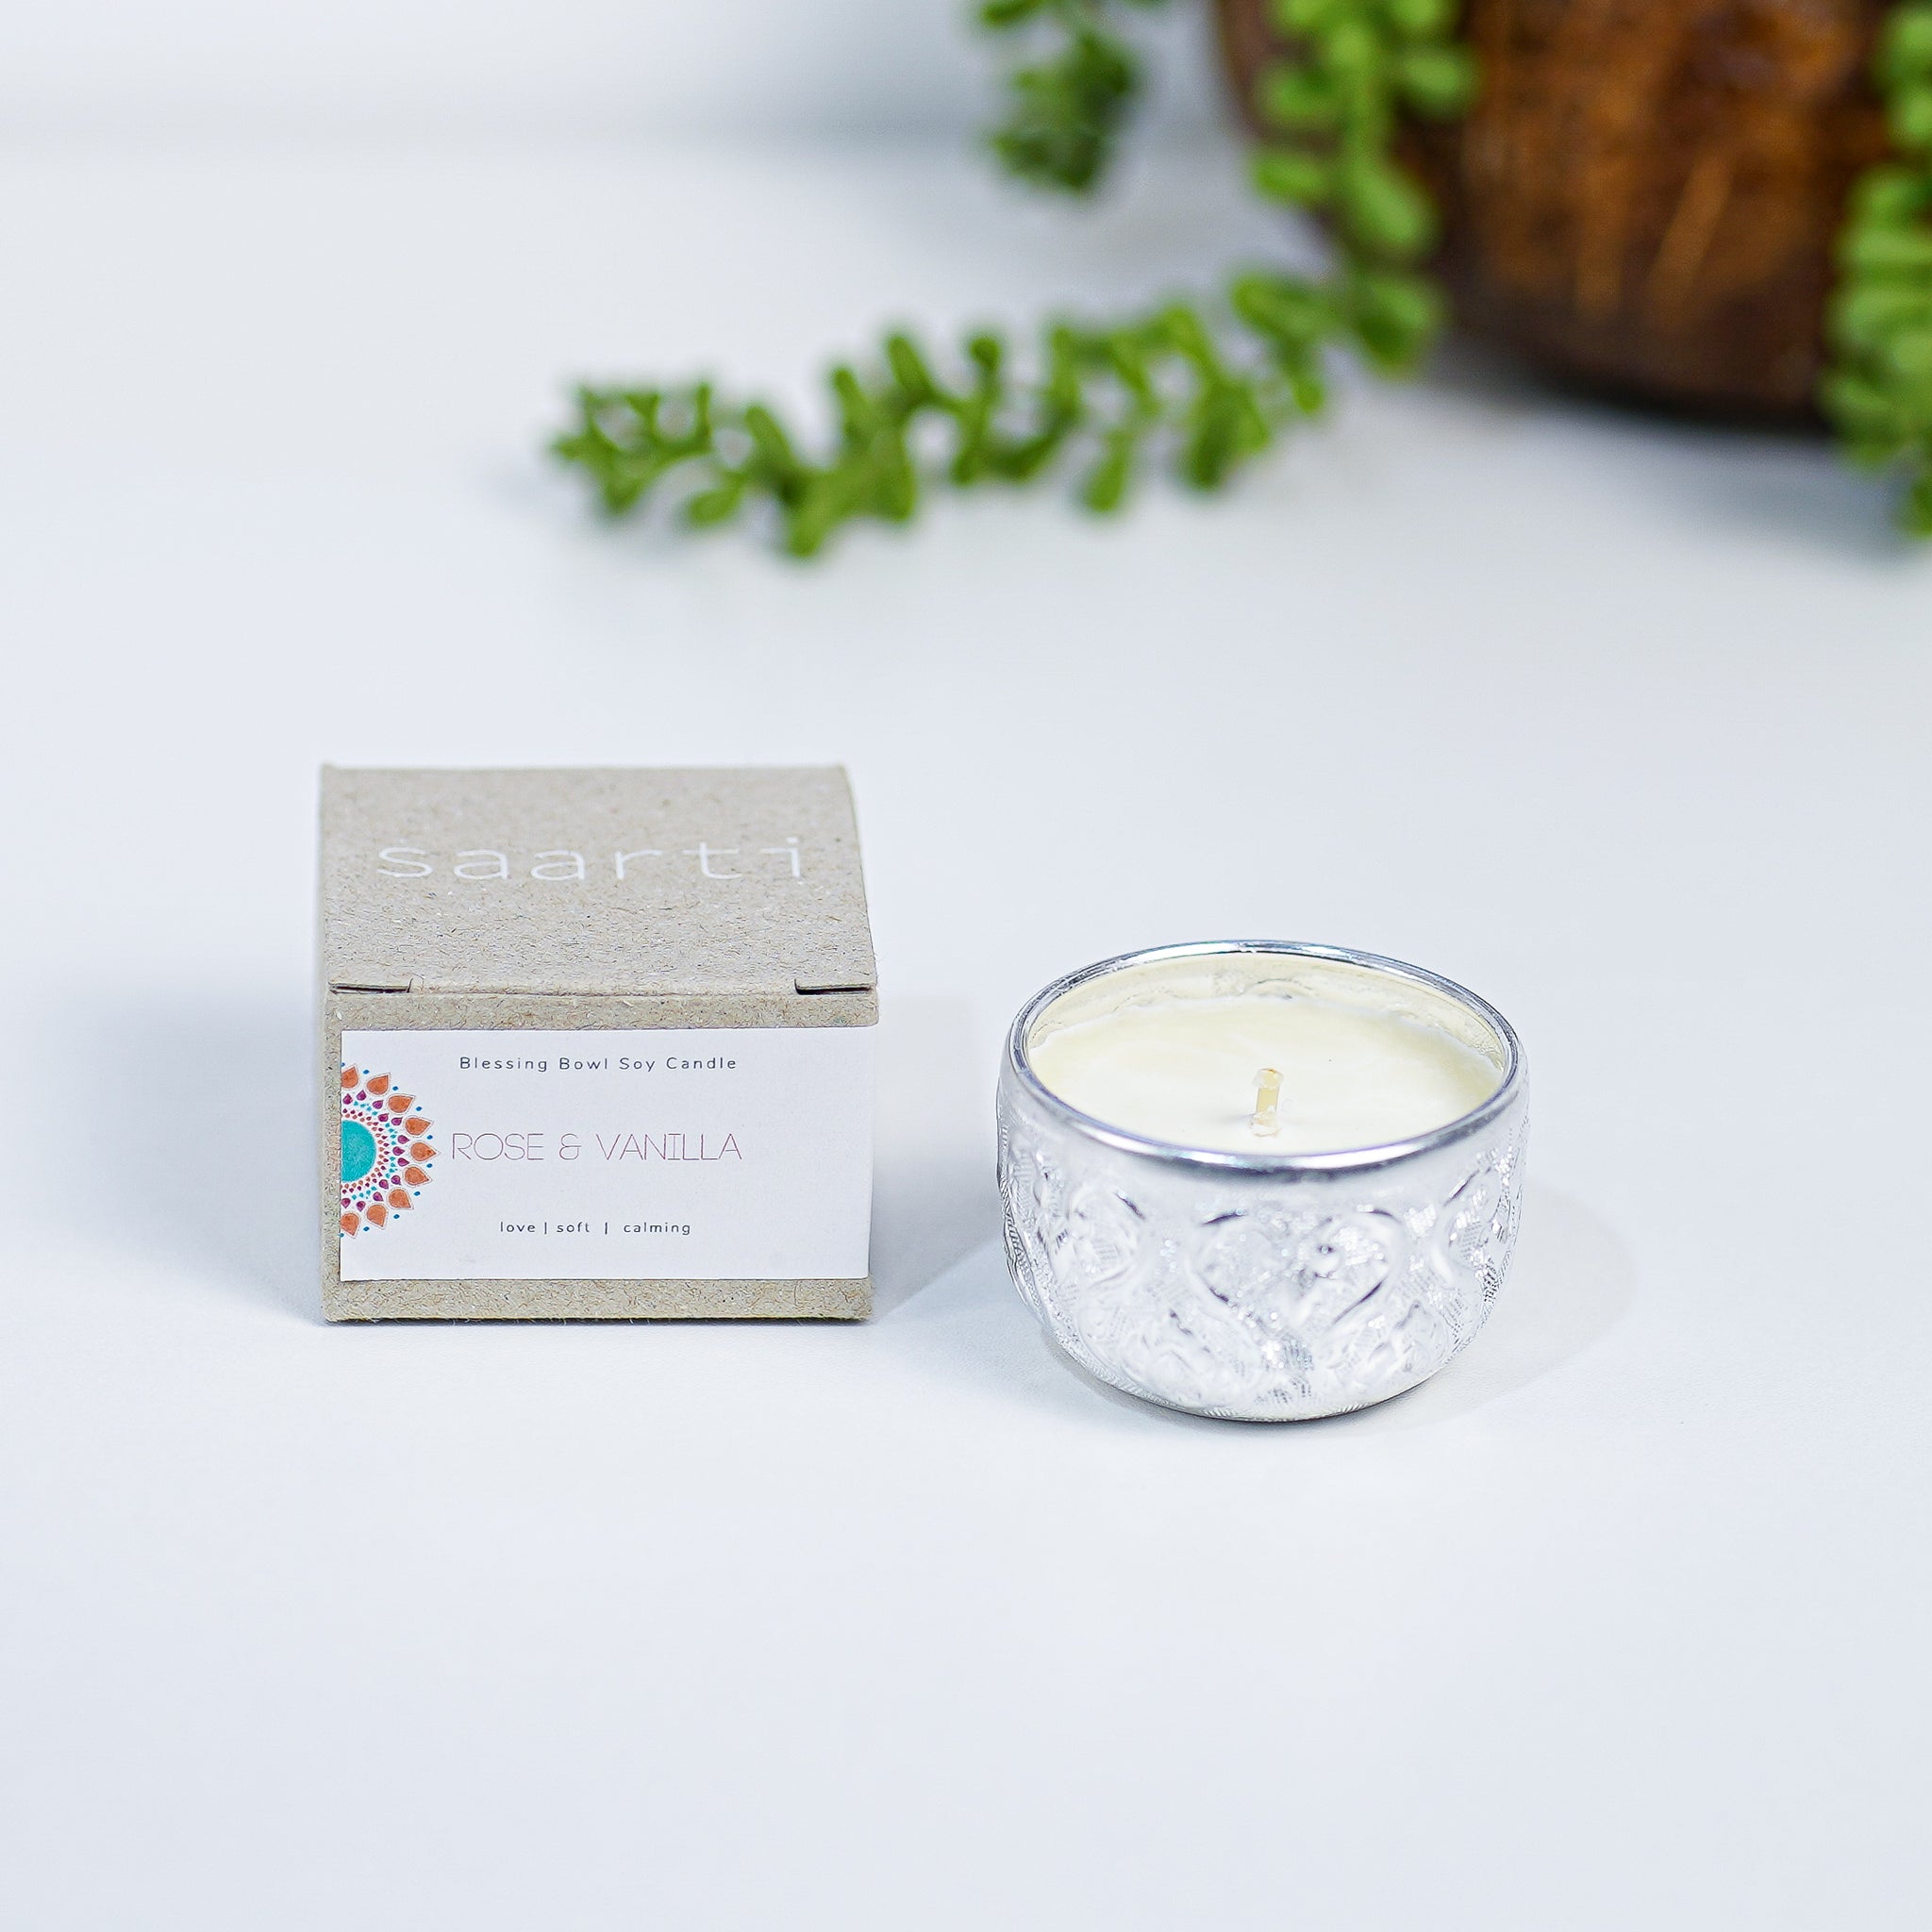 Fill your home with our beautiful Blessing Bowl candle, hand poured with pure soy wax and scented with essential oils of rose and vanilla..